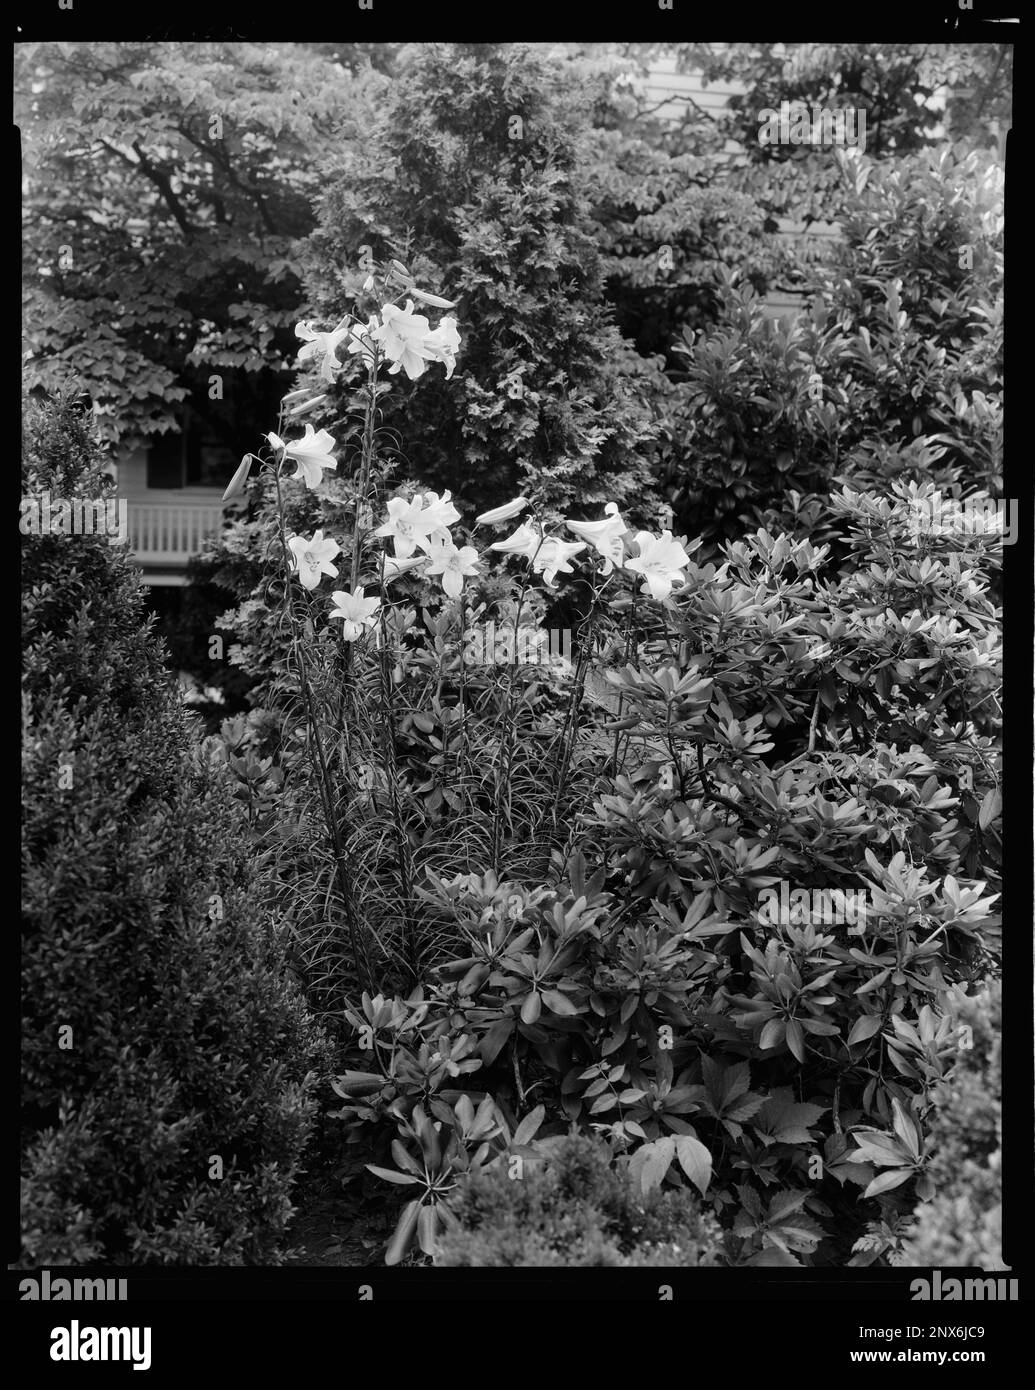 Rose Hill, Greenwood, Albemarle County, Virginia. Carnegie Survey of the Architecture of the South. United States  Virginia  Albemarle County  Greenwood, Lilies, Gardens. Stock Photo